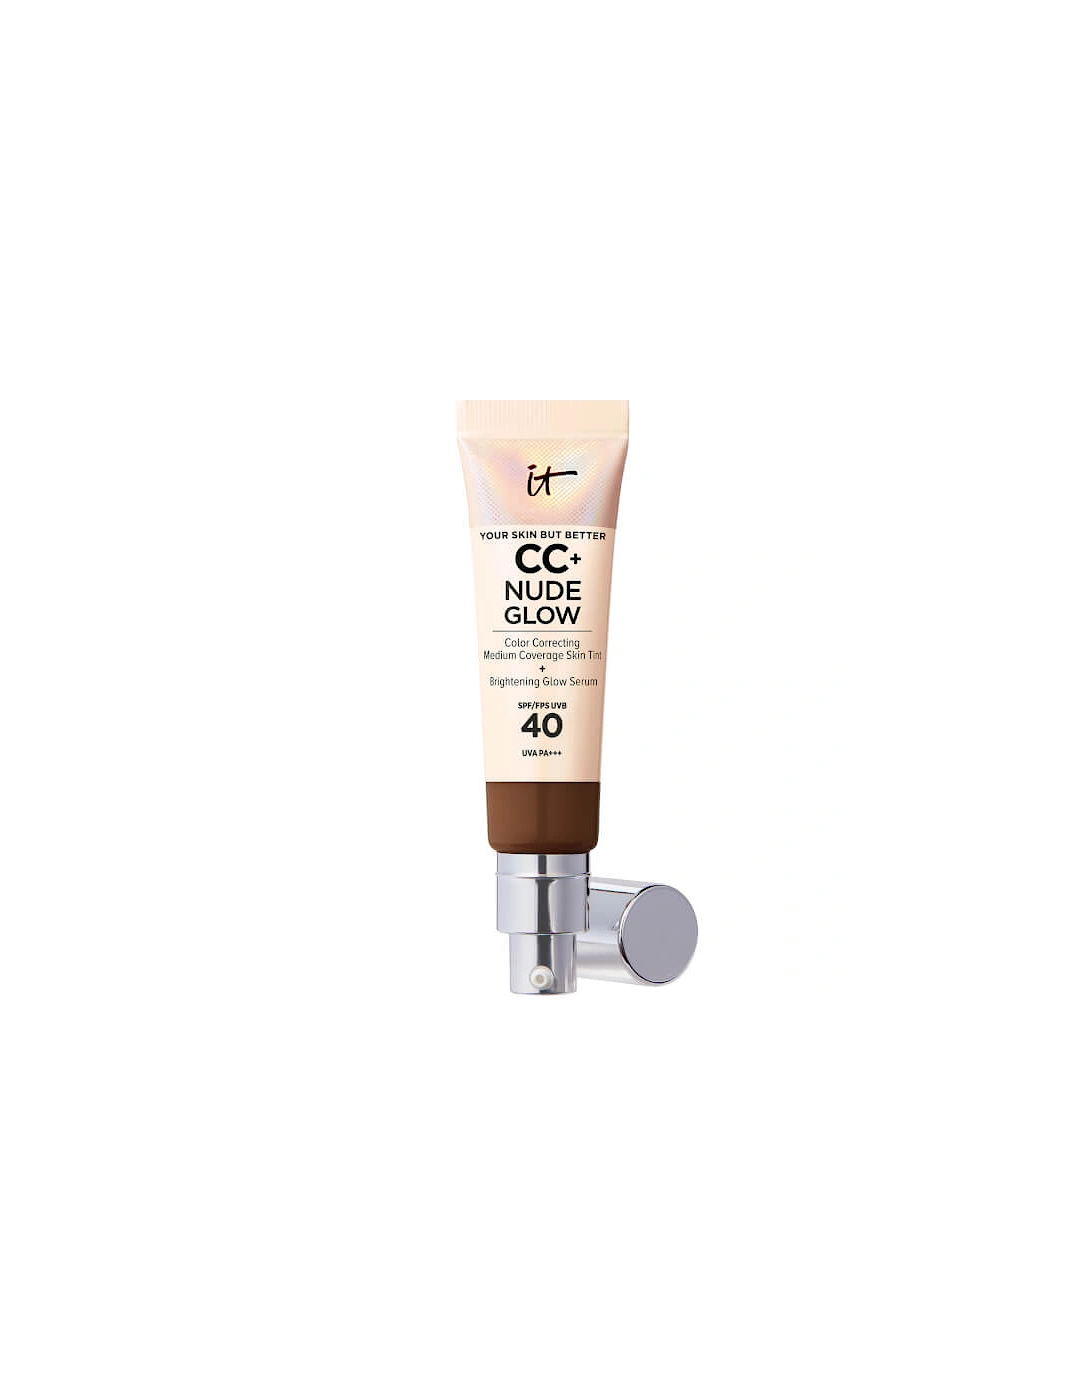 CC+ and Nude Glow Lightweight Foundation and Glow Serum with SPF40 - Deep Honey, 2 of 1